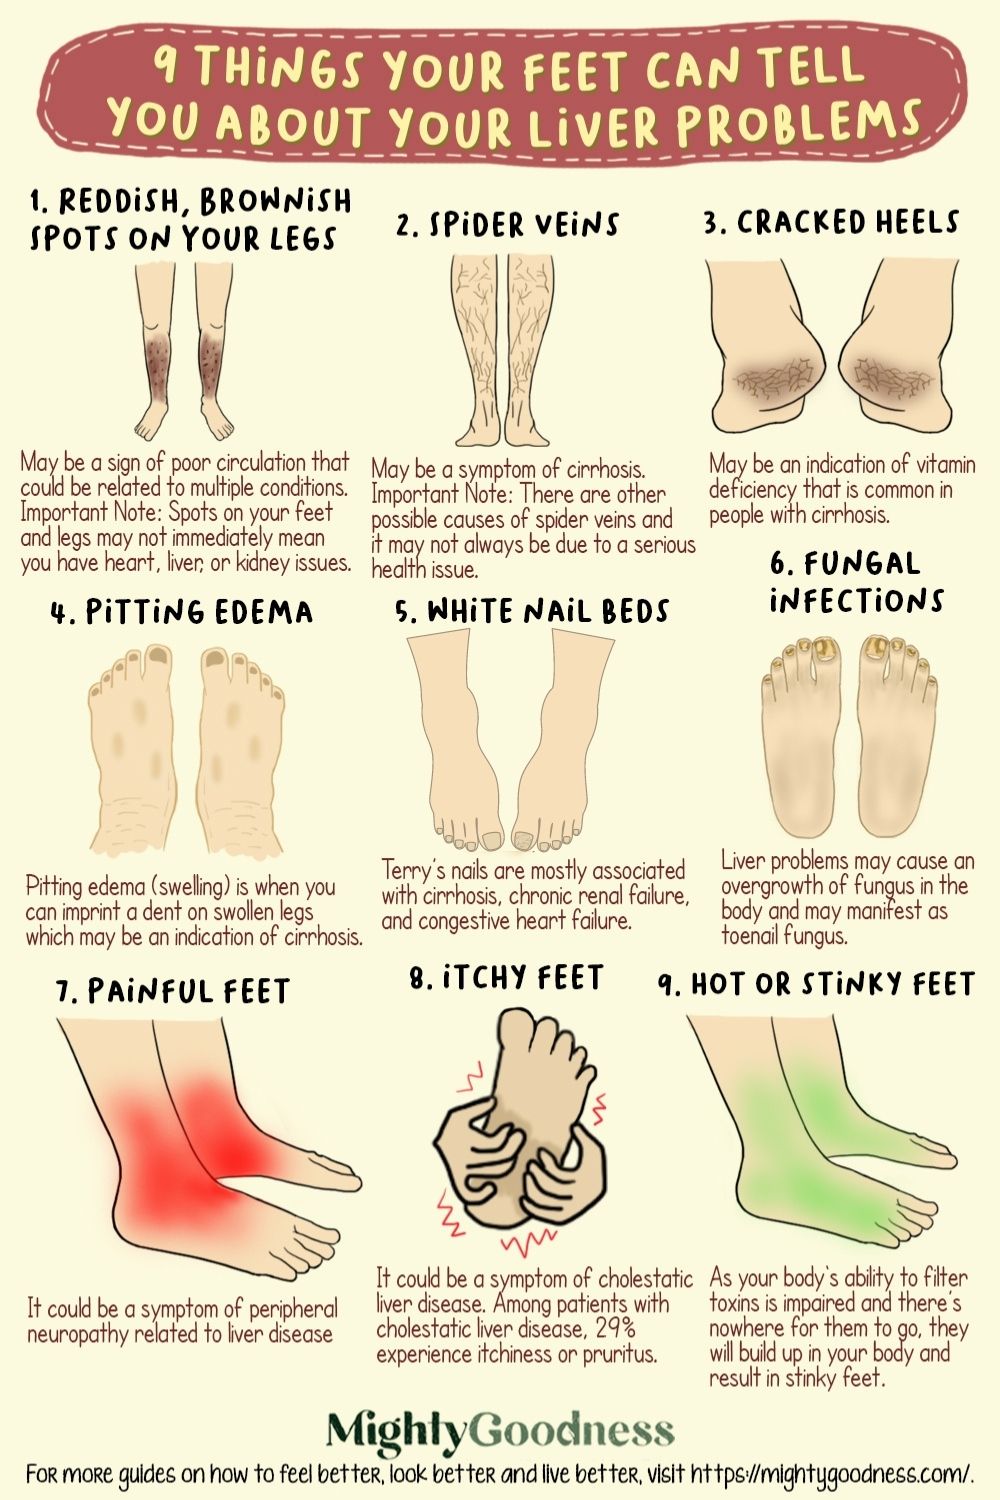 9 Things Your Feet Can Tell You About Your Liver Problems